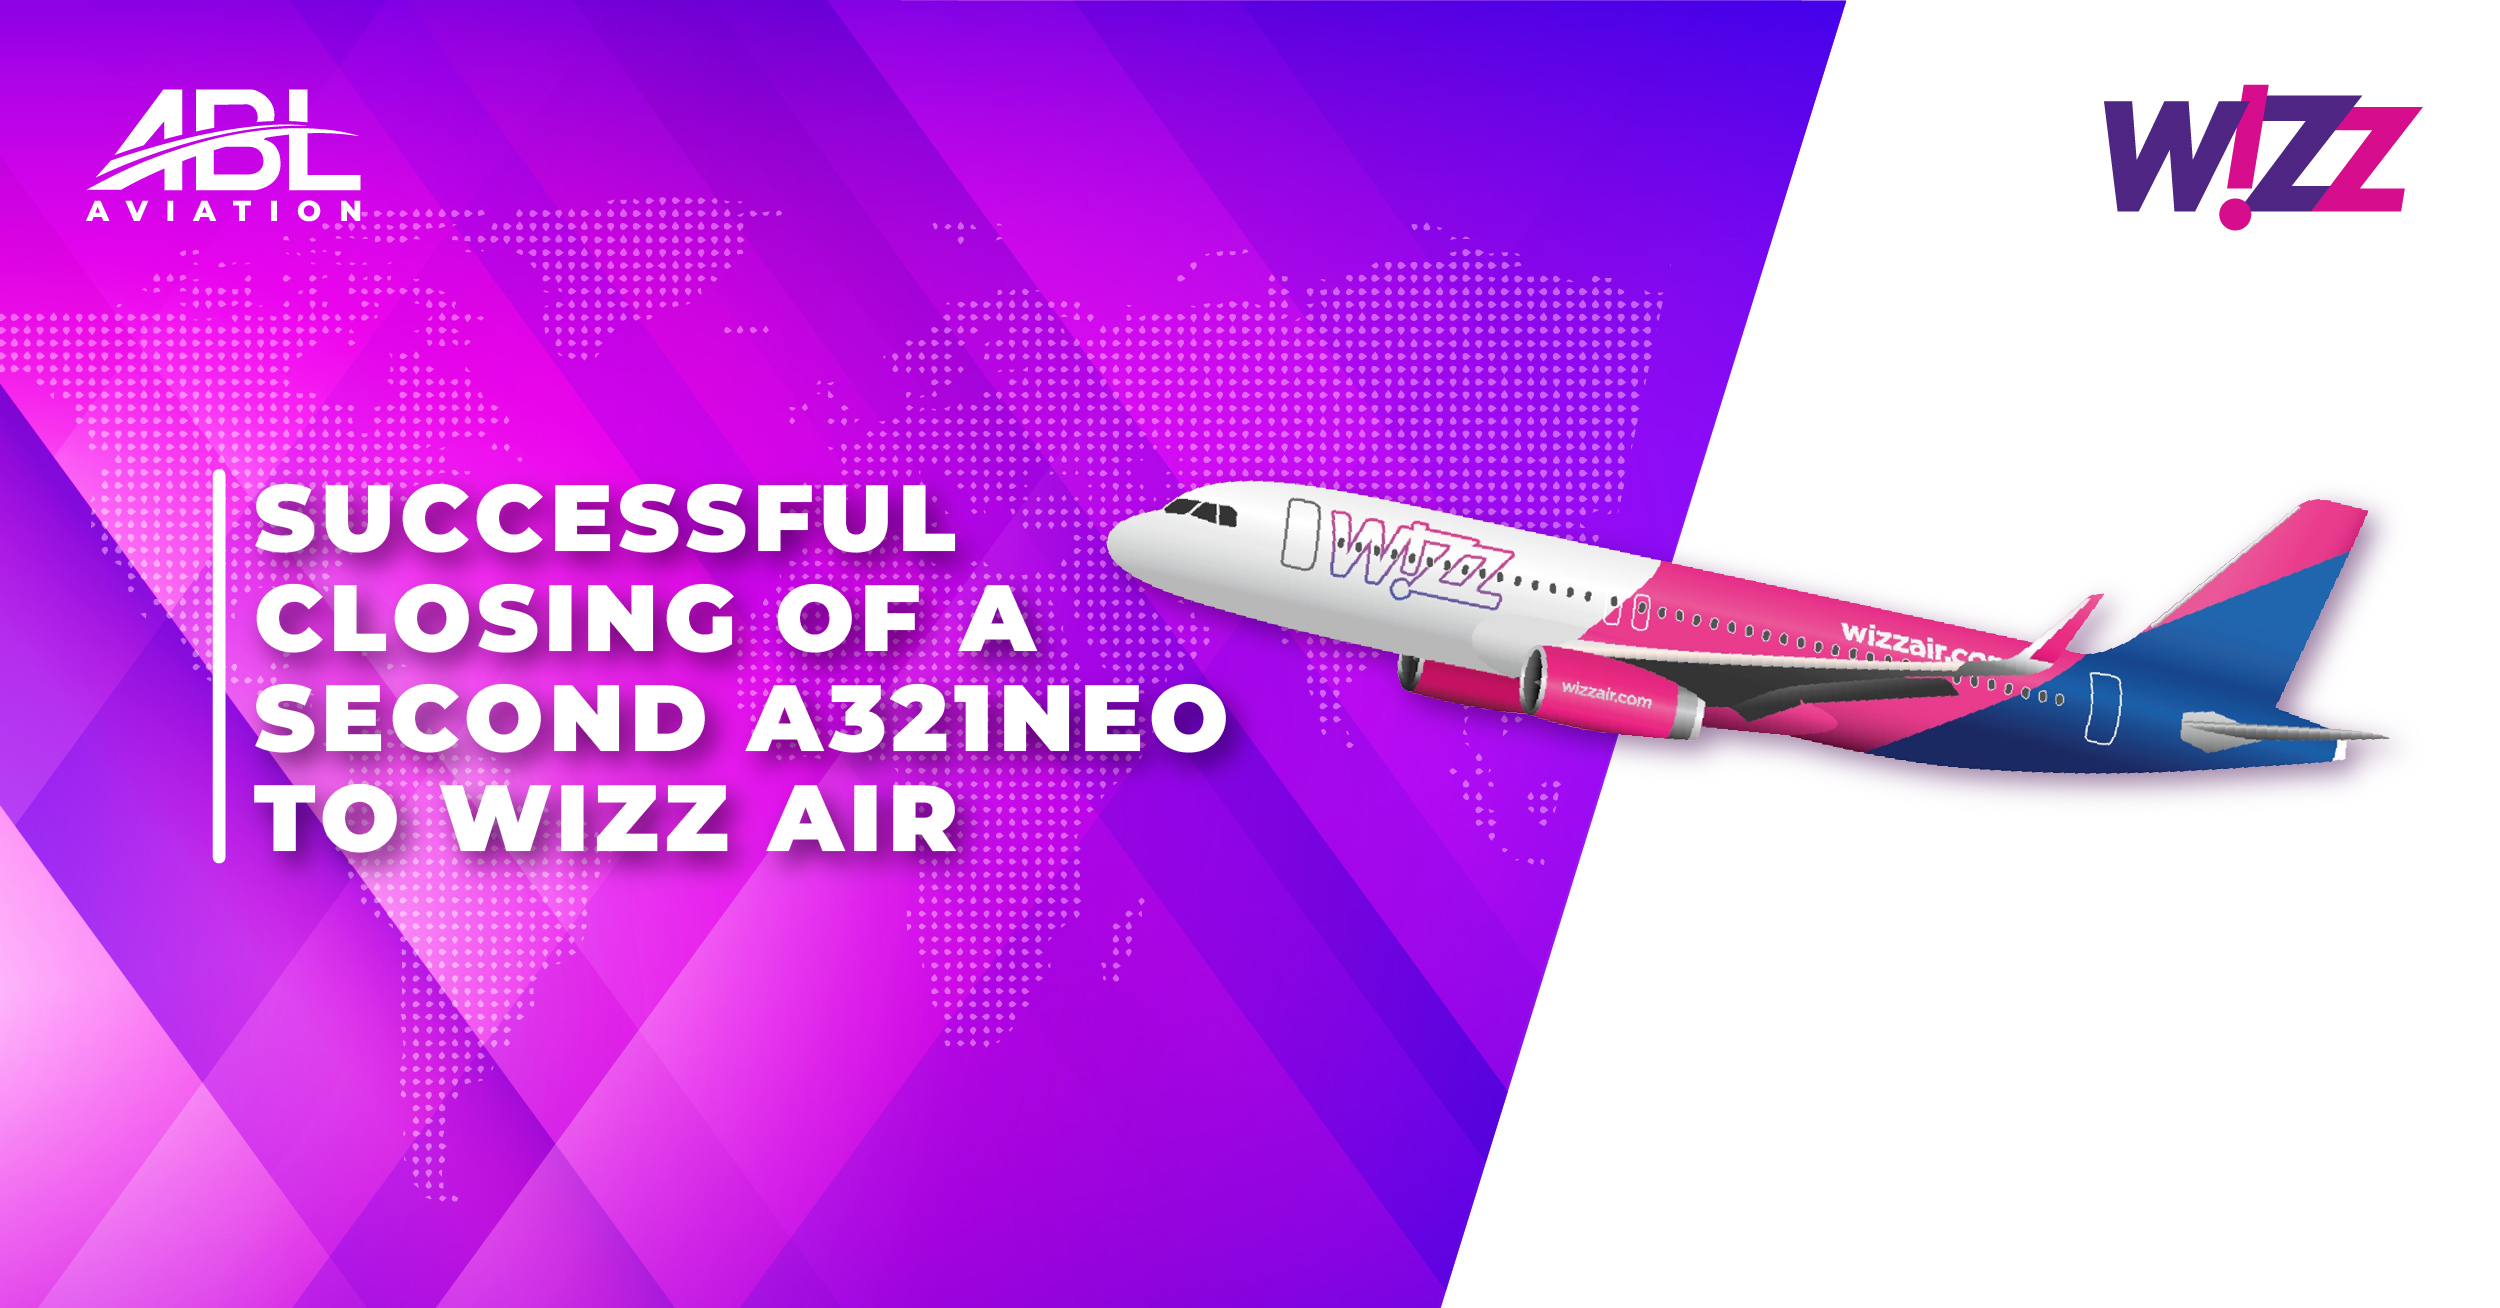 ABL Aviation Announces the Closing of a Second A321neo to Wizz Air